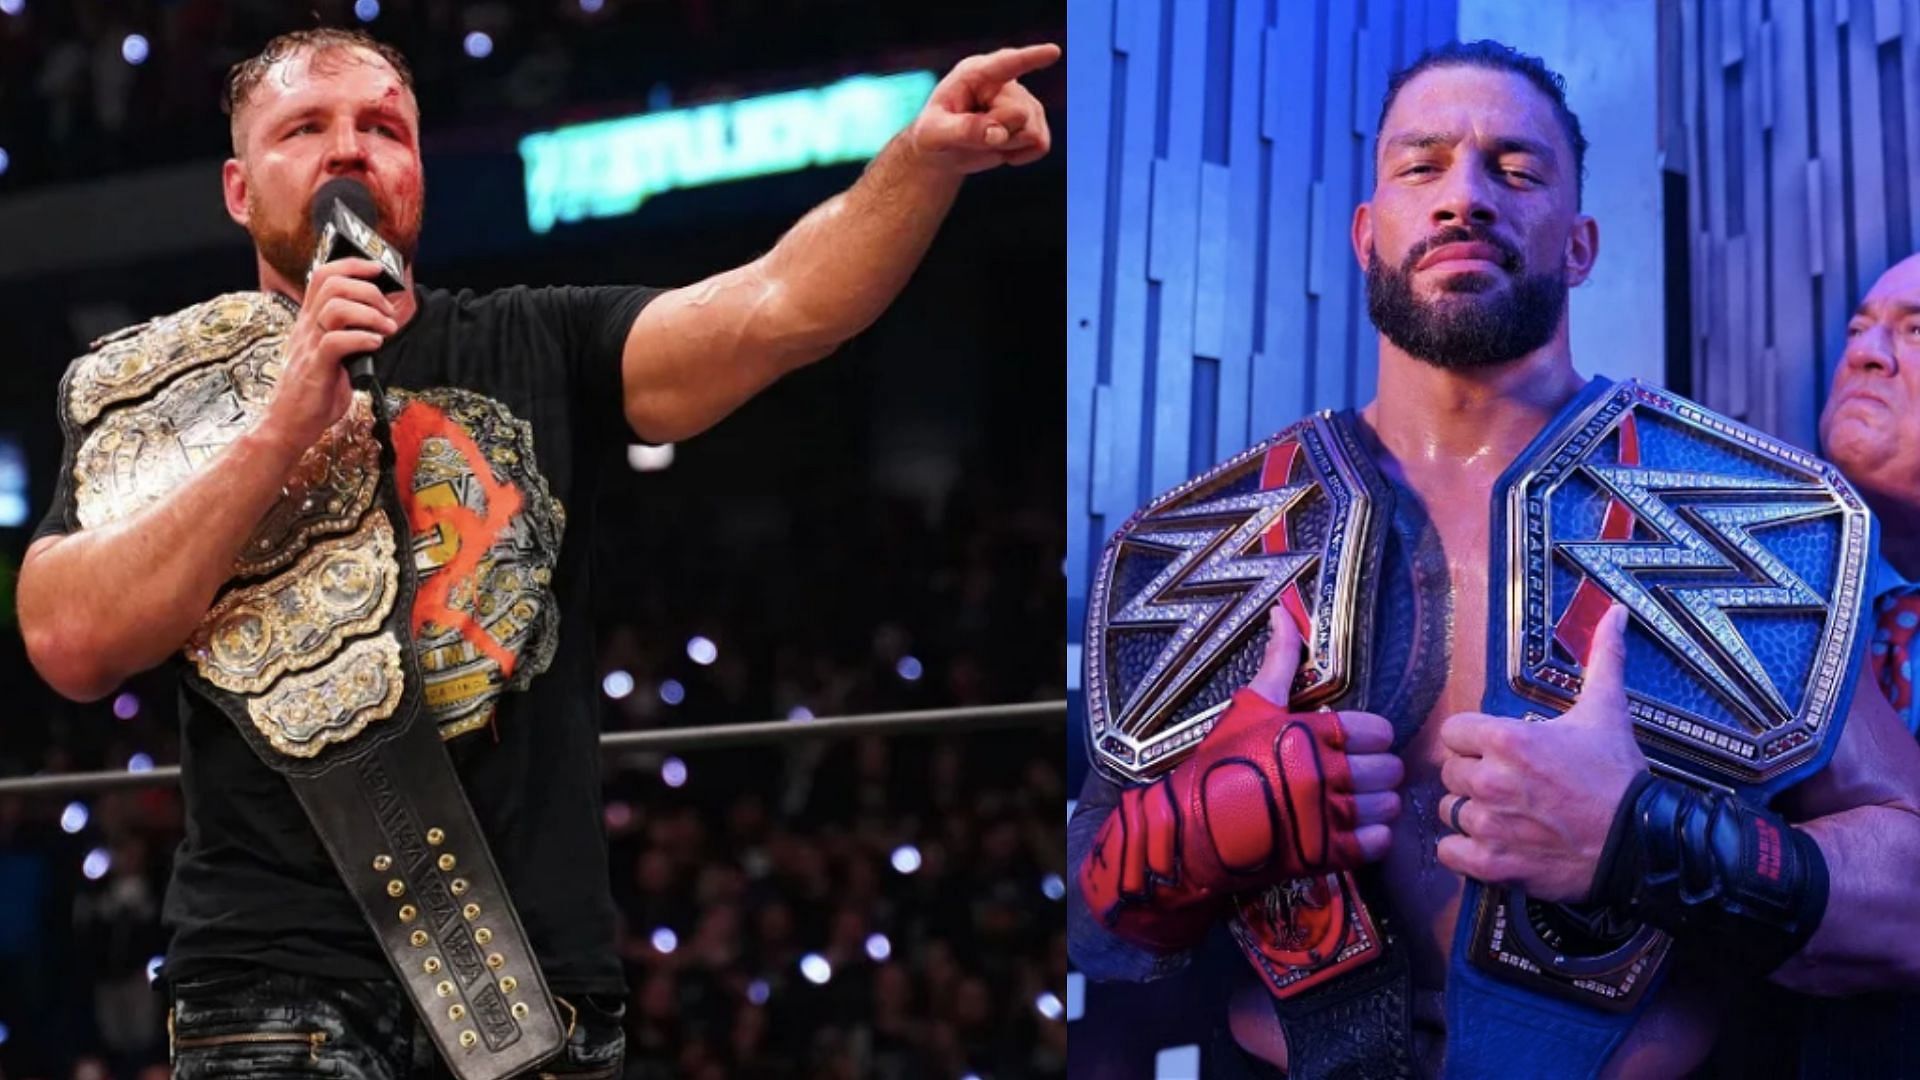 Who is the better world champion, Jon Moxley or Roman Reigns?